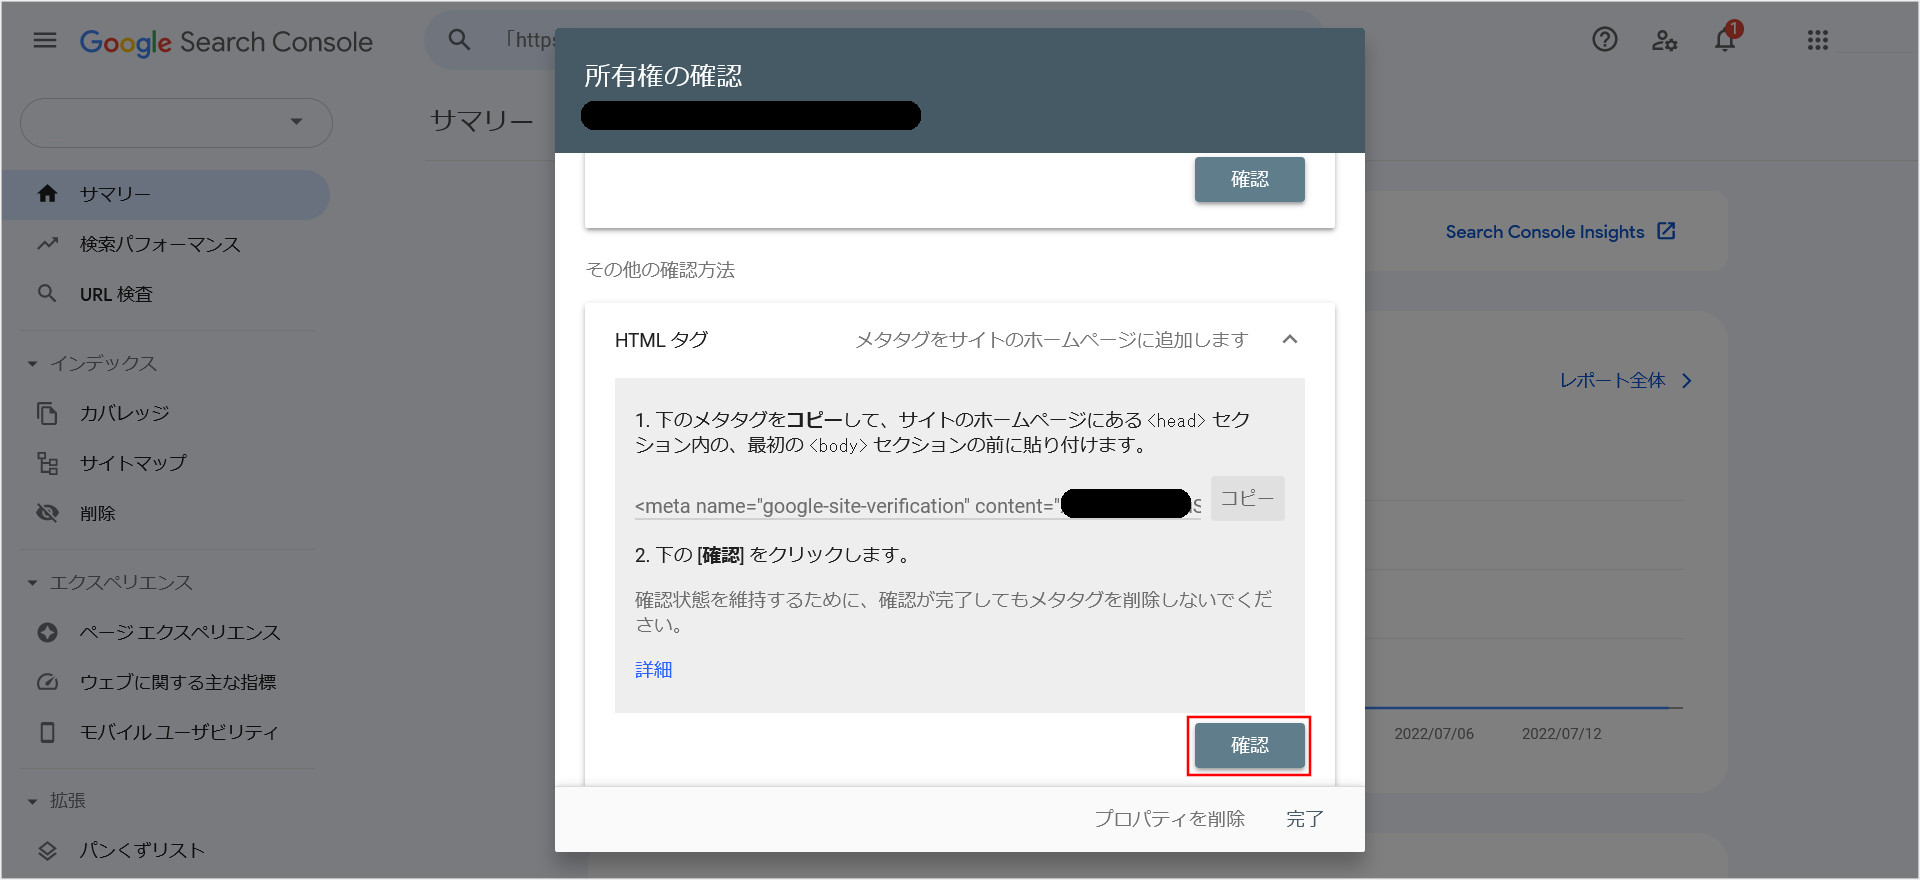 Search Consoleのプロパティ追加画面